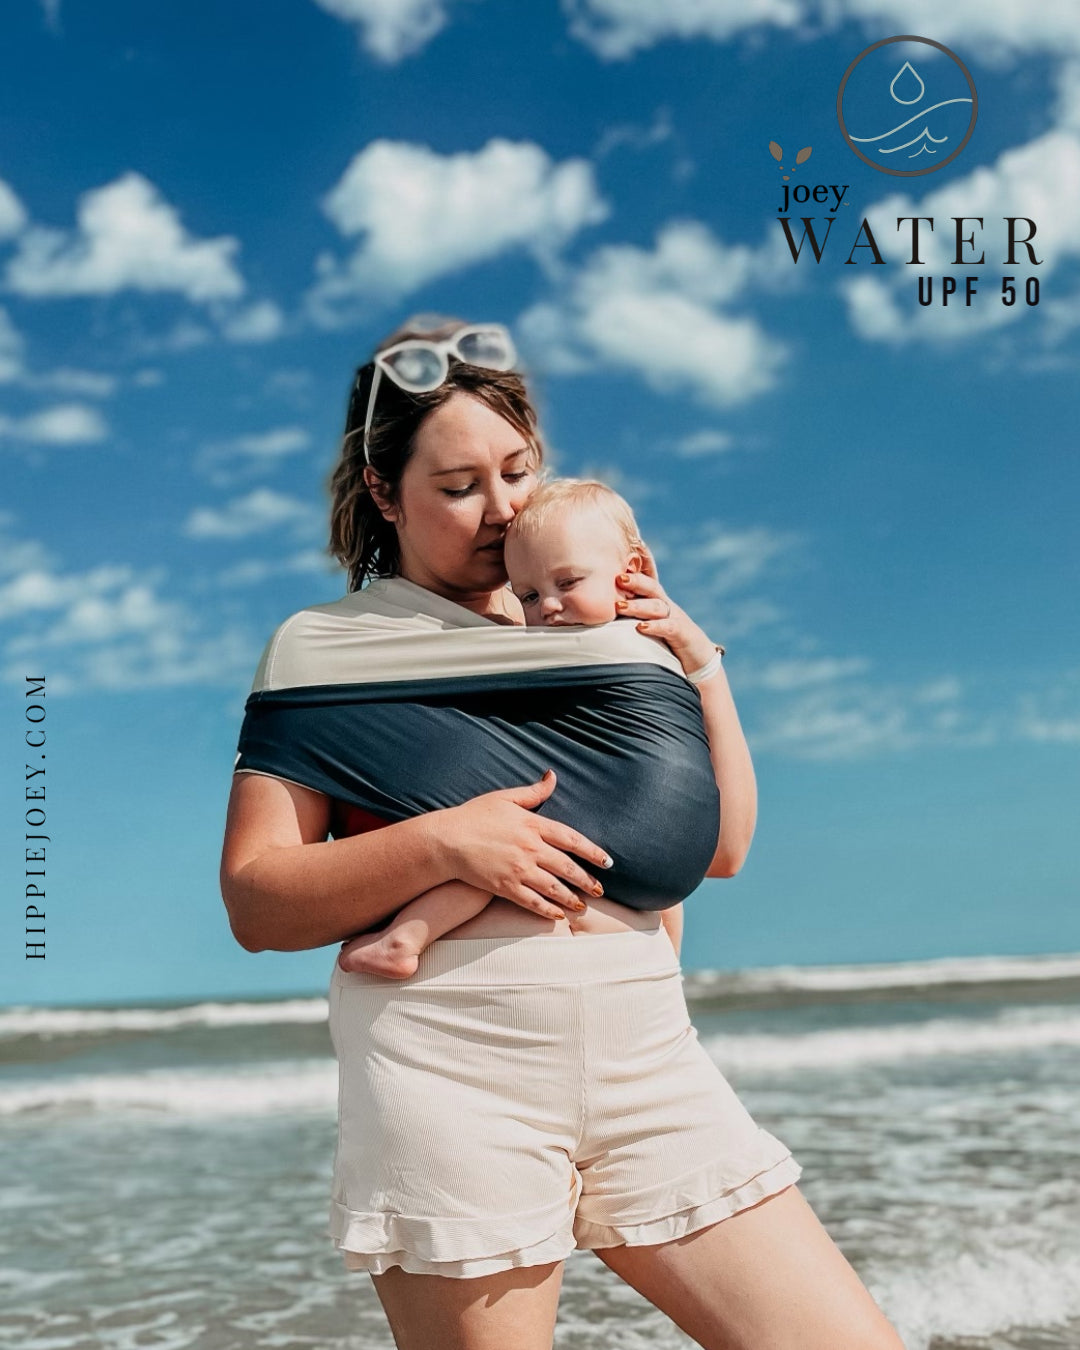 Joey Water (Sling/ Wrap/ baby carrier type assistant garment)  being used on the beach to keep baby safe and secure while swimming in ocean.